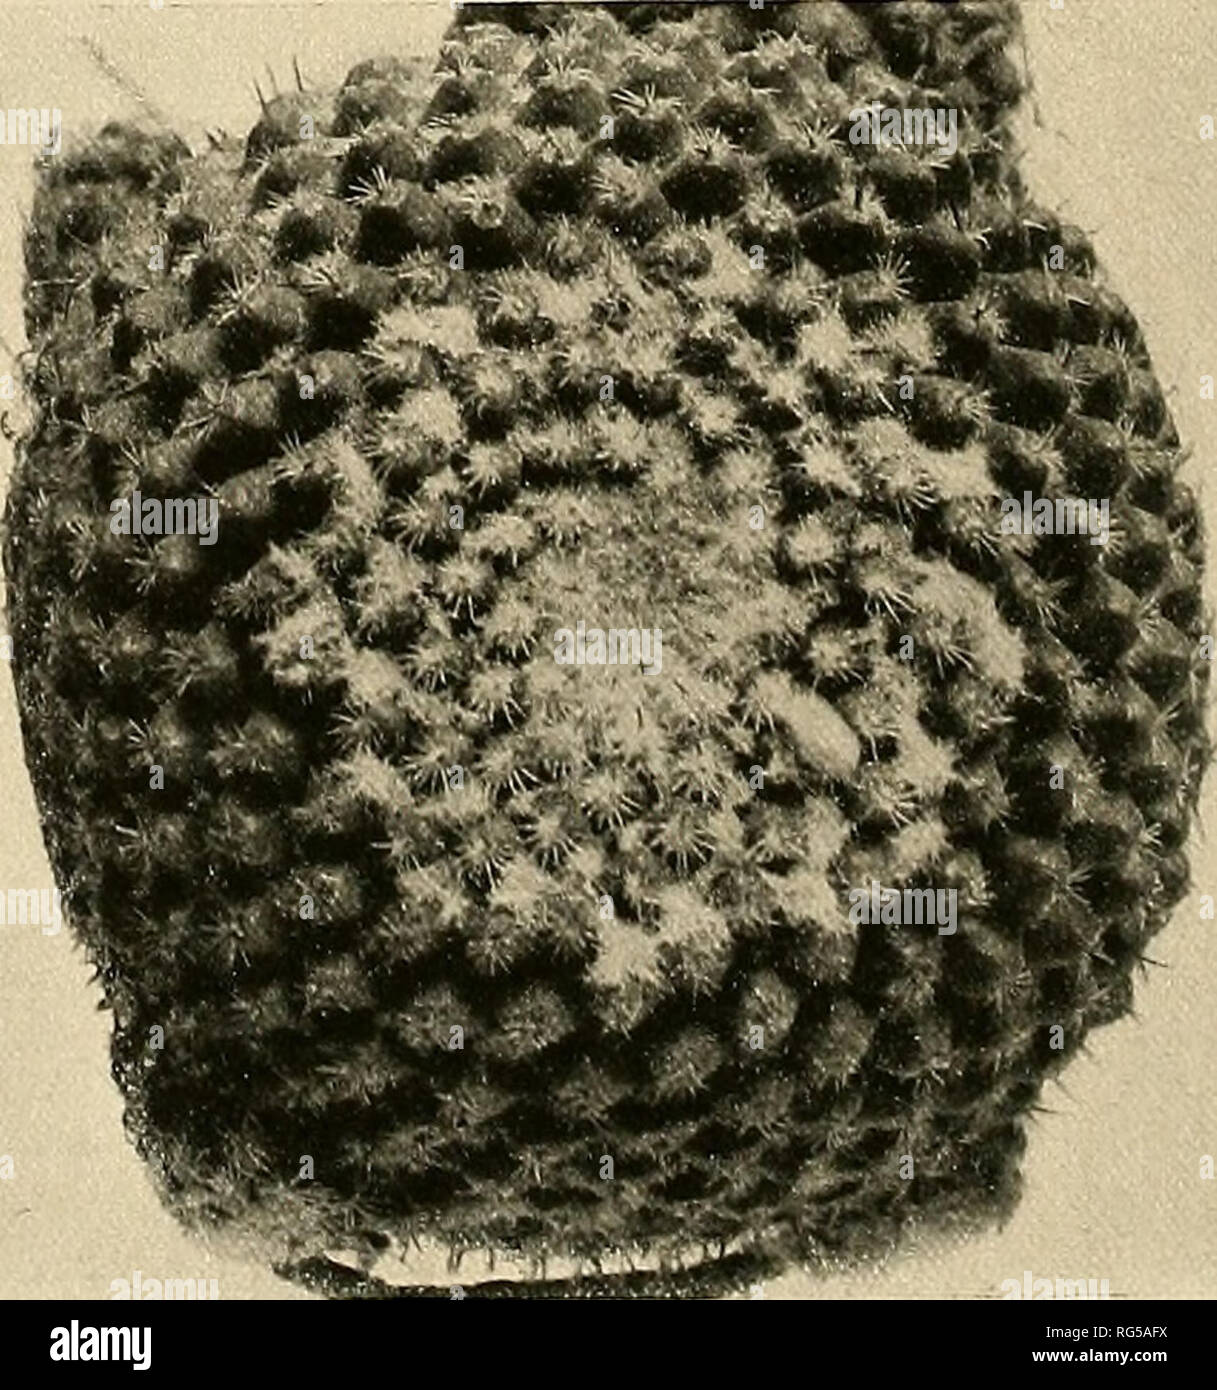 . The Cactaceae : descriptions and illustrations of plants of the cactus family. 164 THE CACTACEAE. Figure 181 is a reproduction of the photograph mentioned above; figure 183 shows the seed and spine-cluster of the type. 147. Neomammillaria tacubayensis (Fedde). Mammillaria tacubayensis Fedde, Nov. Gen. Sp. Ind. 1905. 443. 1905. Globose, 3 to 5 cm. in diameter; radial spines 35 to 40, white, 3 to 5 mm. long; central spines I, black, 5 to 6 mm. long, hooked; flower 1.5 cm. long. Type locality: Near Tacubaya, Mexico. Distribution: Mexico, but range unknown. We know the plant only from the origin Stock Photo